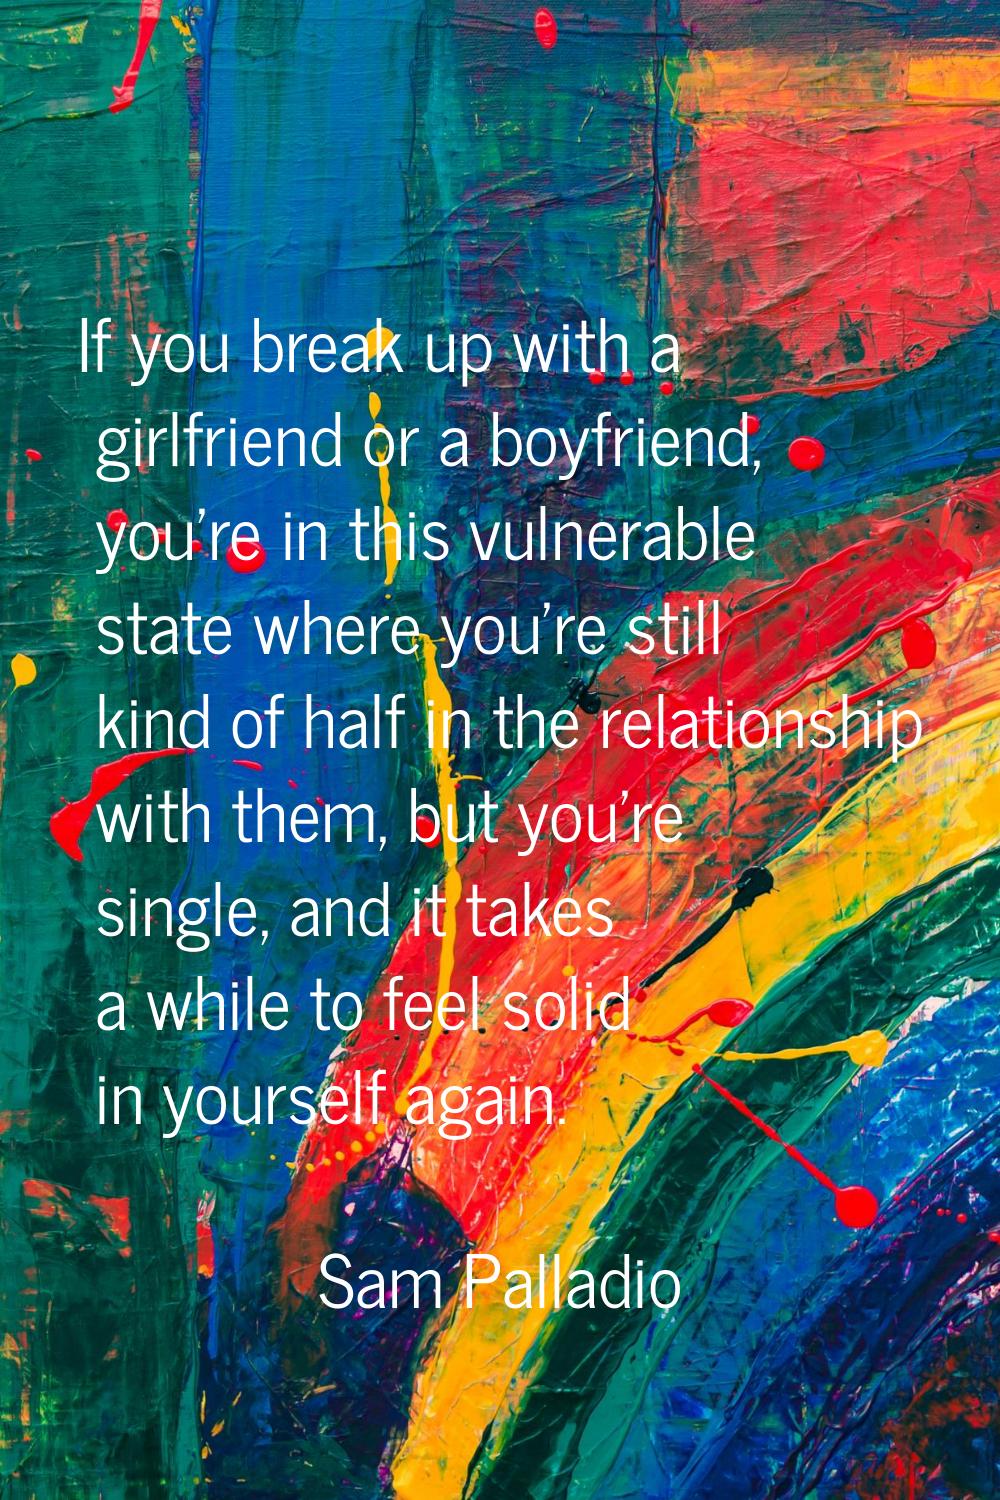 If you break up with a girlfriend or a boyfriend, you're in this vulnerable state where you're stil